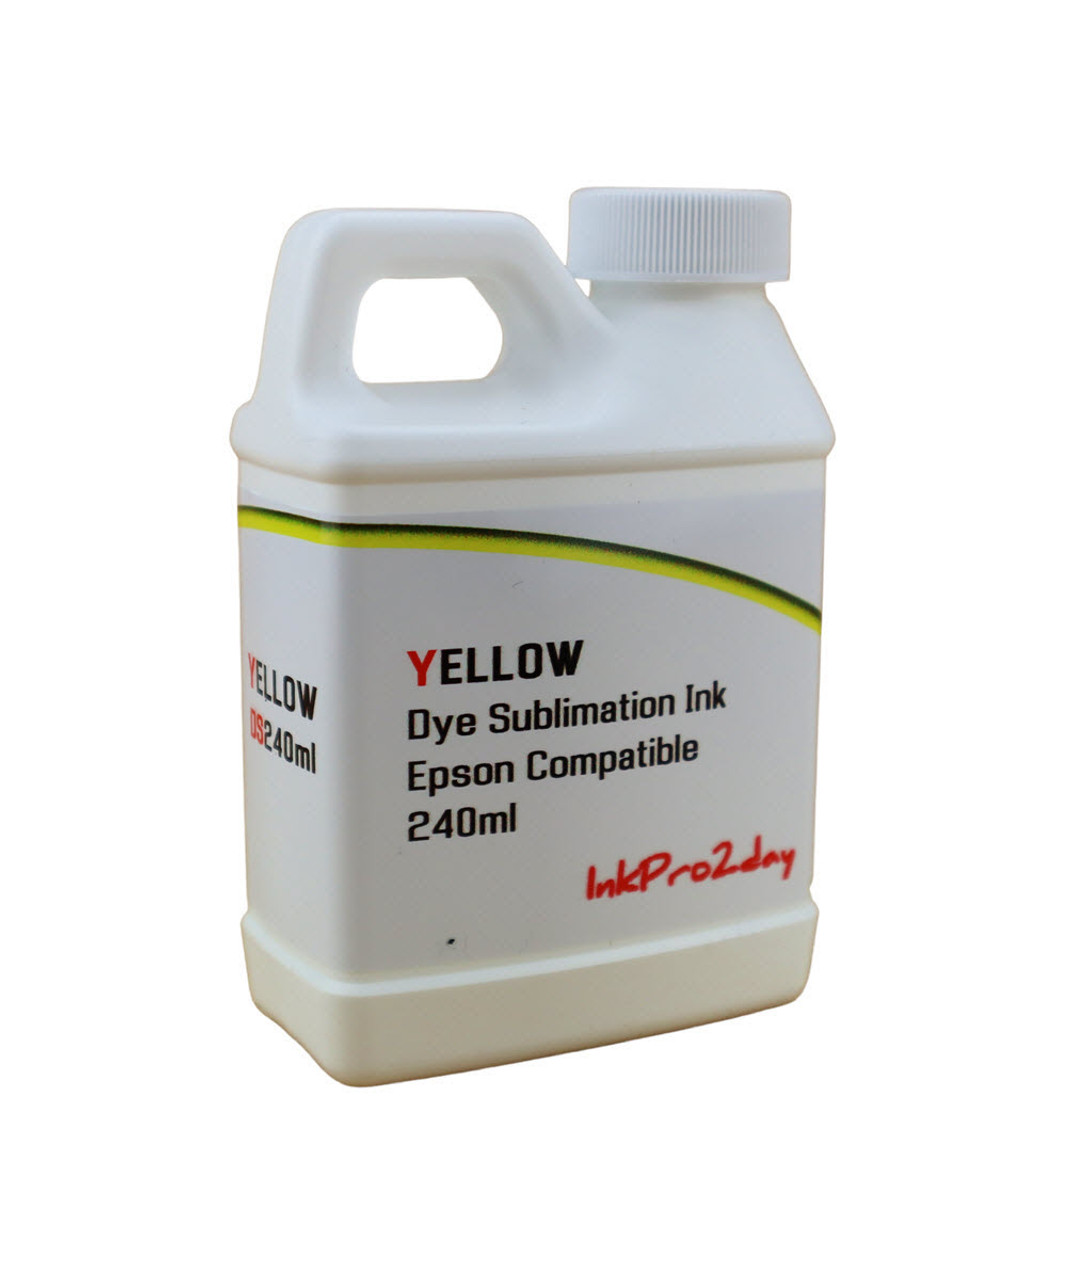 Yellow 240ml bottle Dye Sublimation Ink for Epson WorkForce WF-3540, WorkForce WF-7010, WorkForce WF-7510, WorkForce WF-7520 Printers